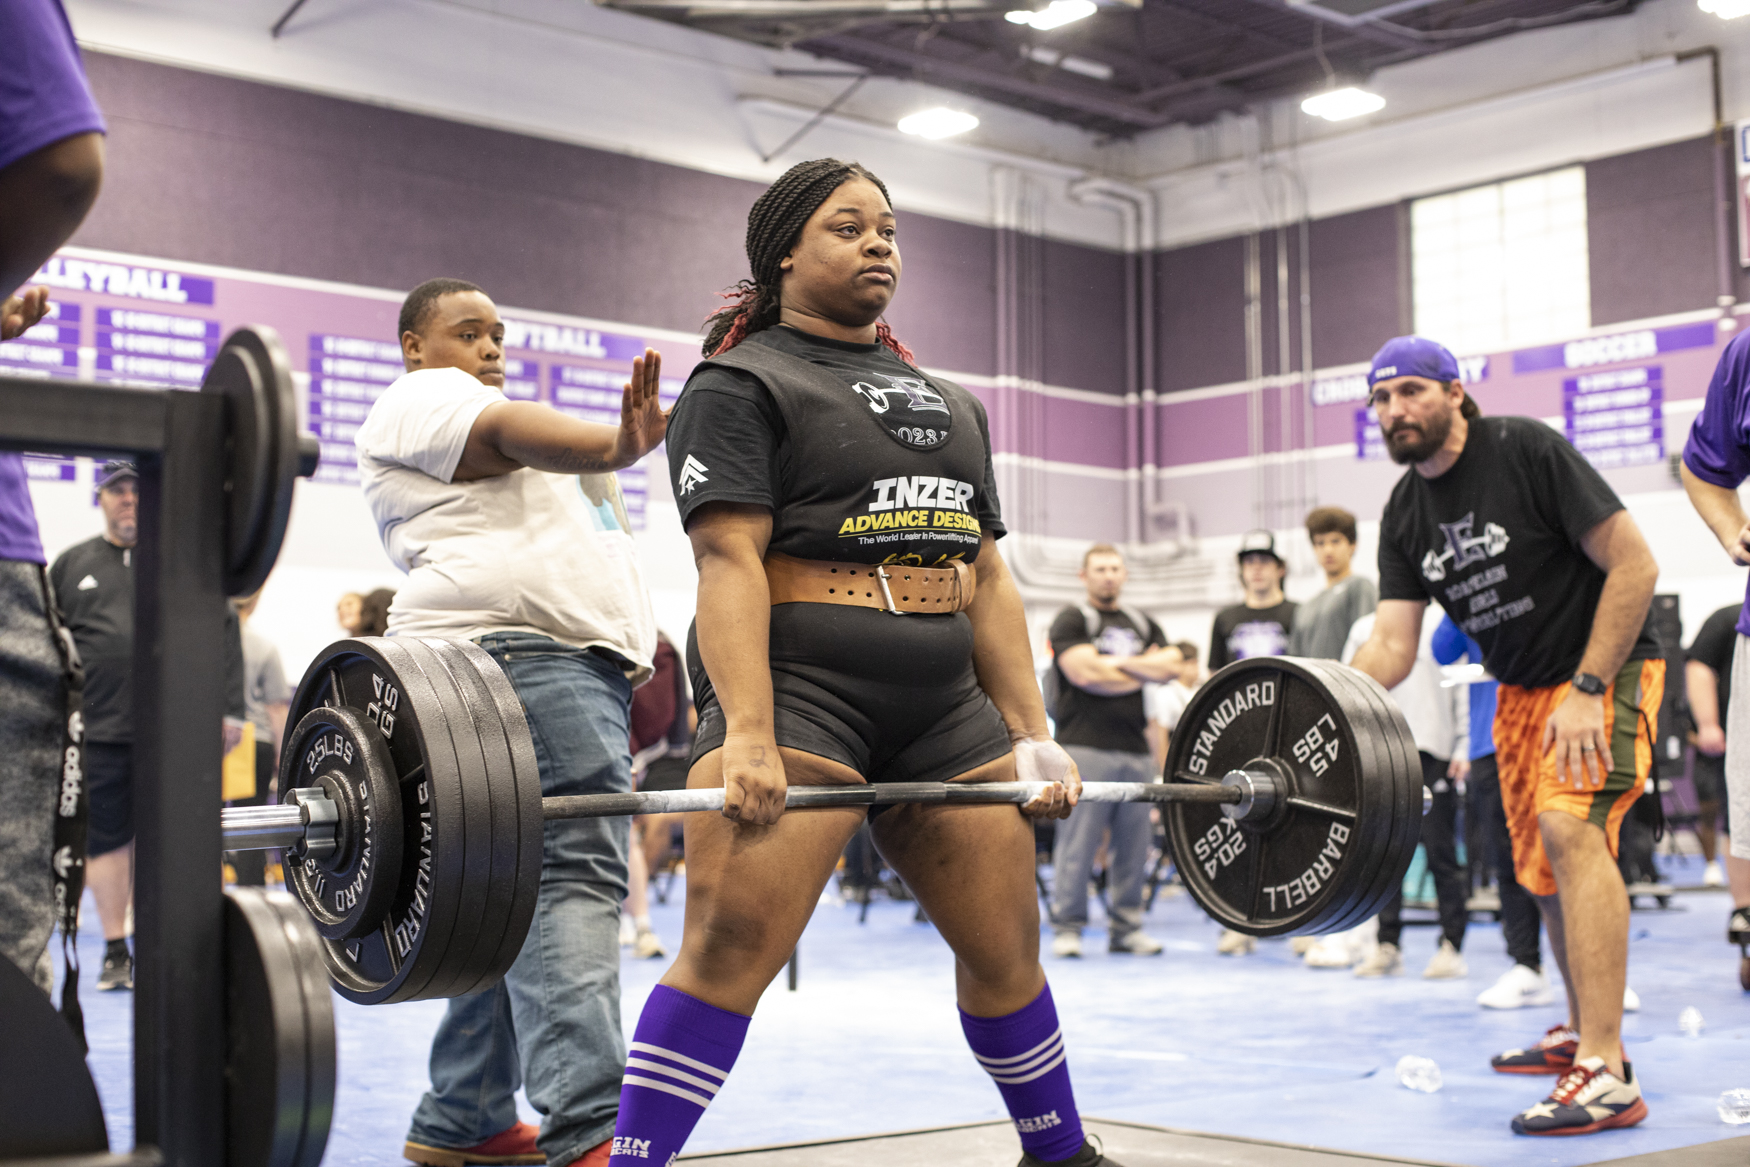 Anderson Powerlifting